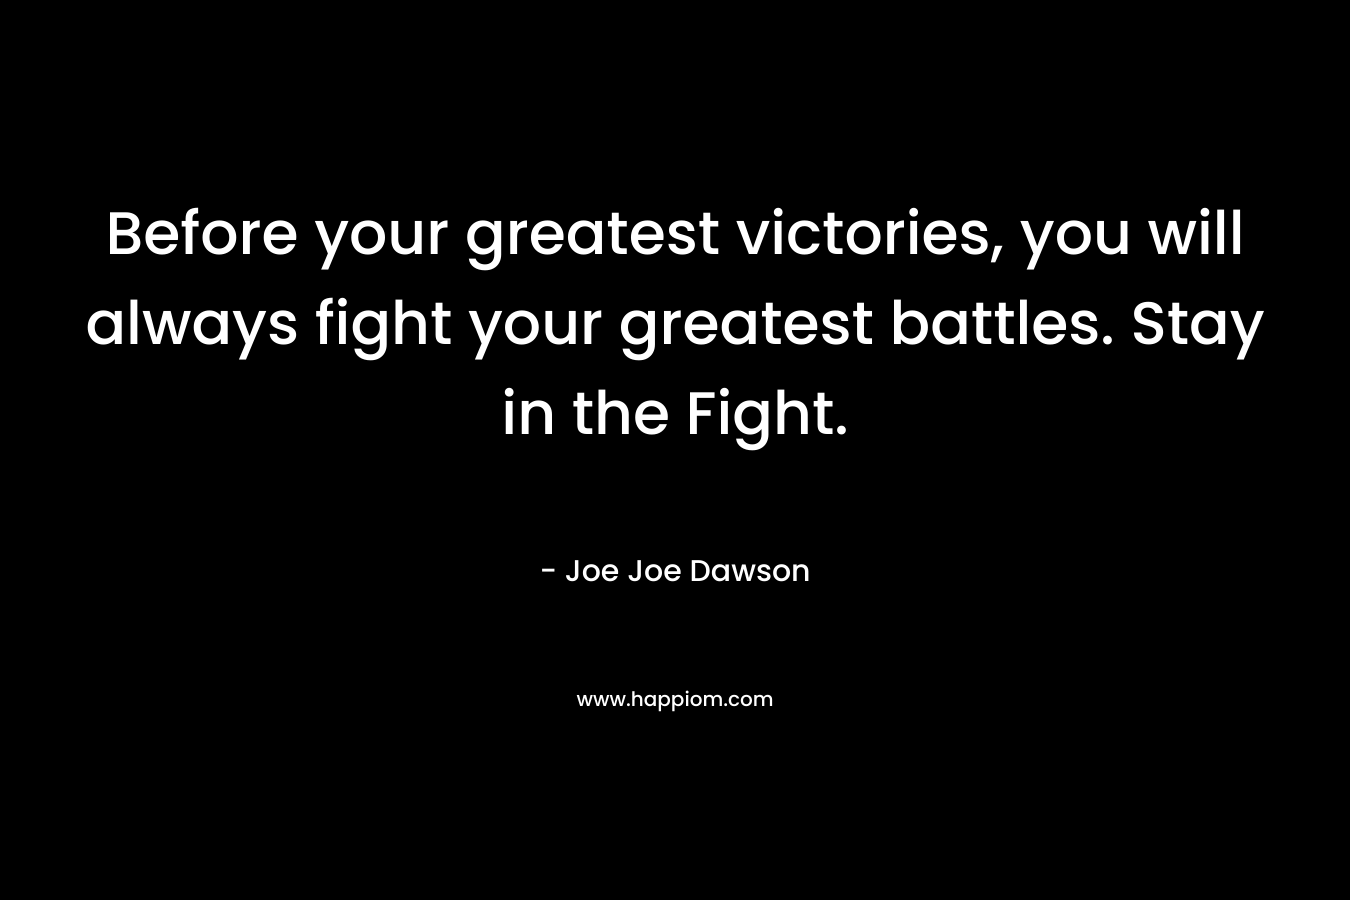 Before your greatest victories, you will always fight your greatest battles. Stay in the Fight.